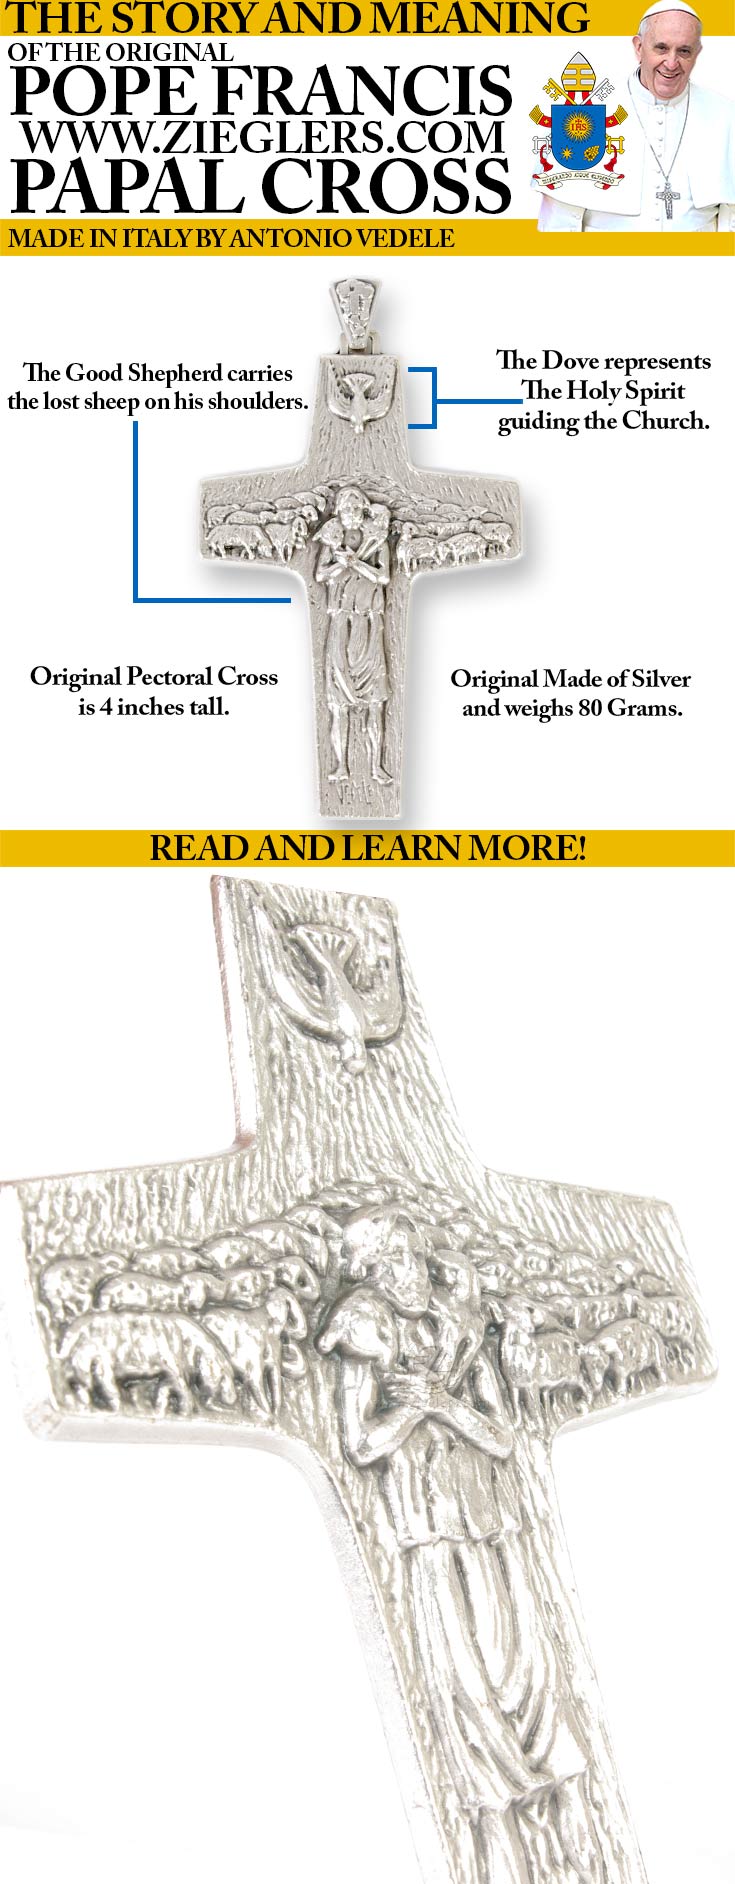 The Pope Francis Papal Pectoral Cross Story and Meaning - F.C. Ziegler Company